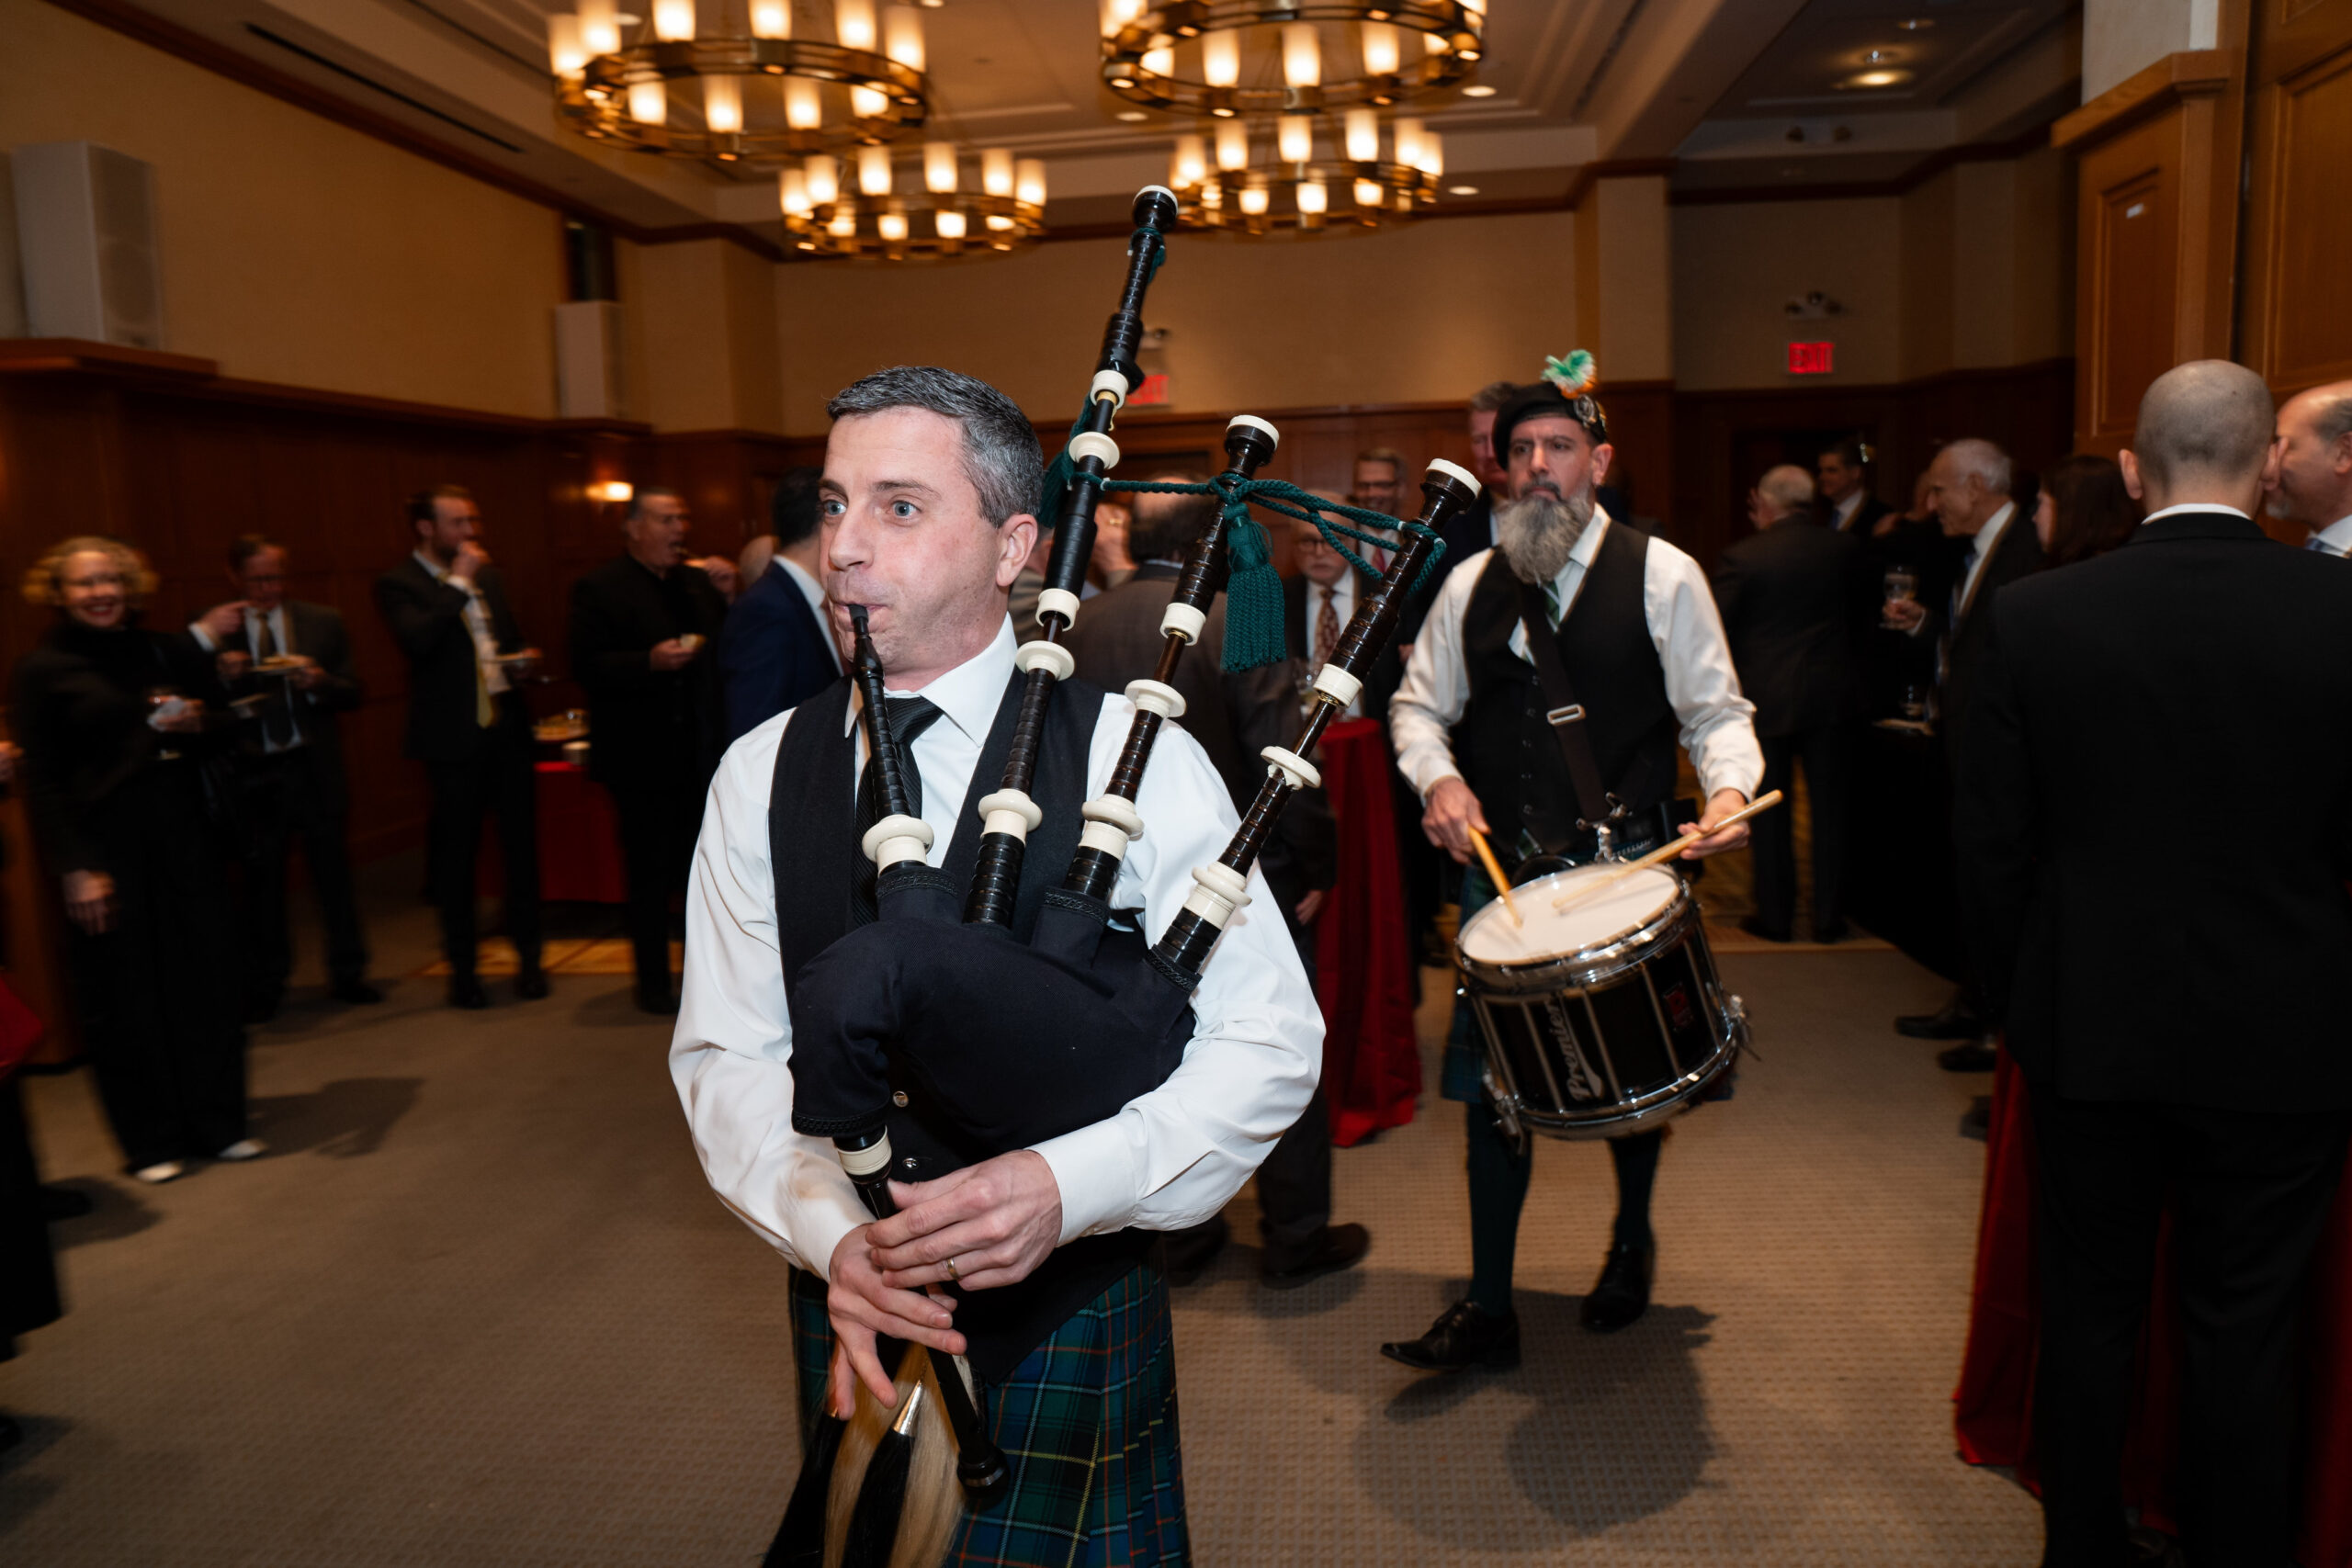 William Gillen, a past president of the Bay Ridge Lawyers Association, led the bagpipe processional at Graham's swearing-in.Photo courtesy of Brooklyn Law School